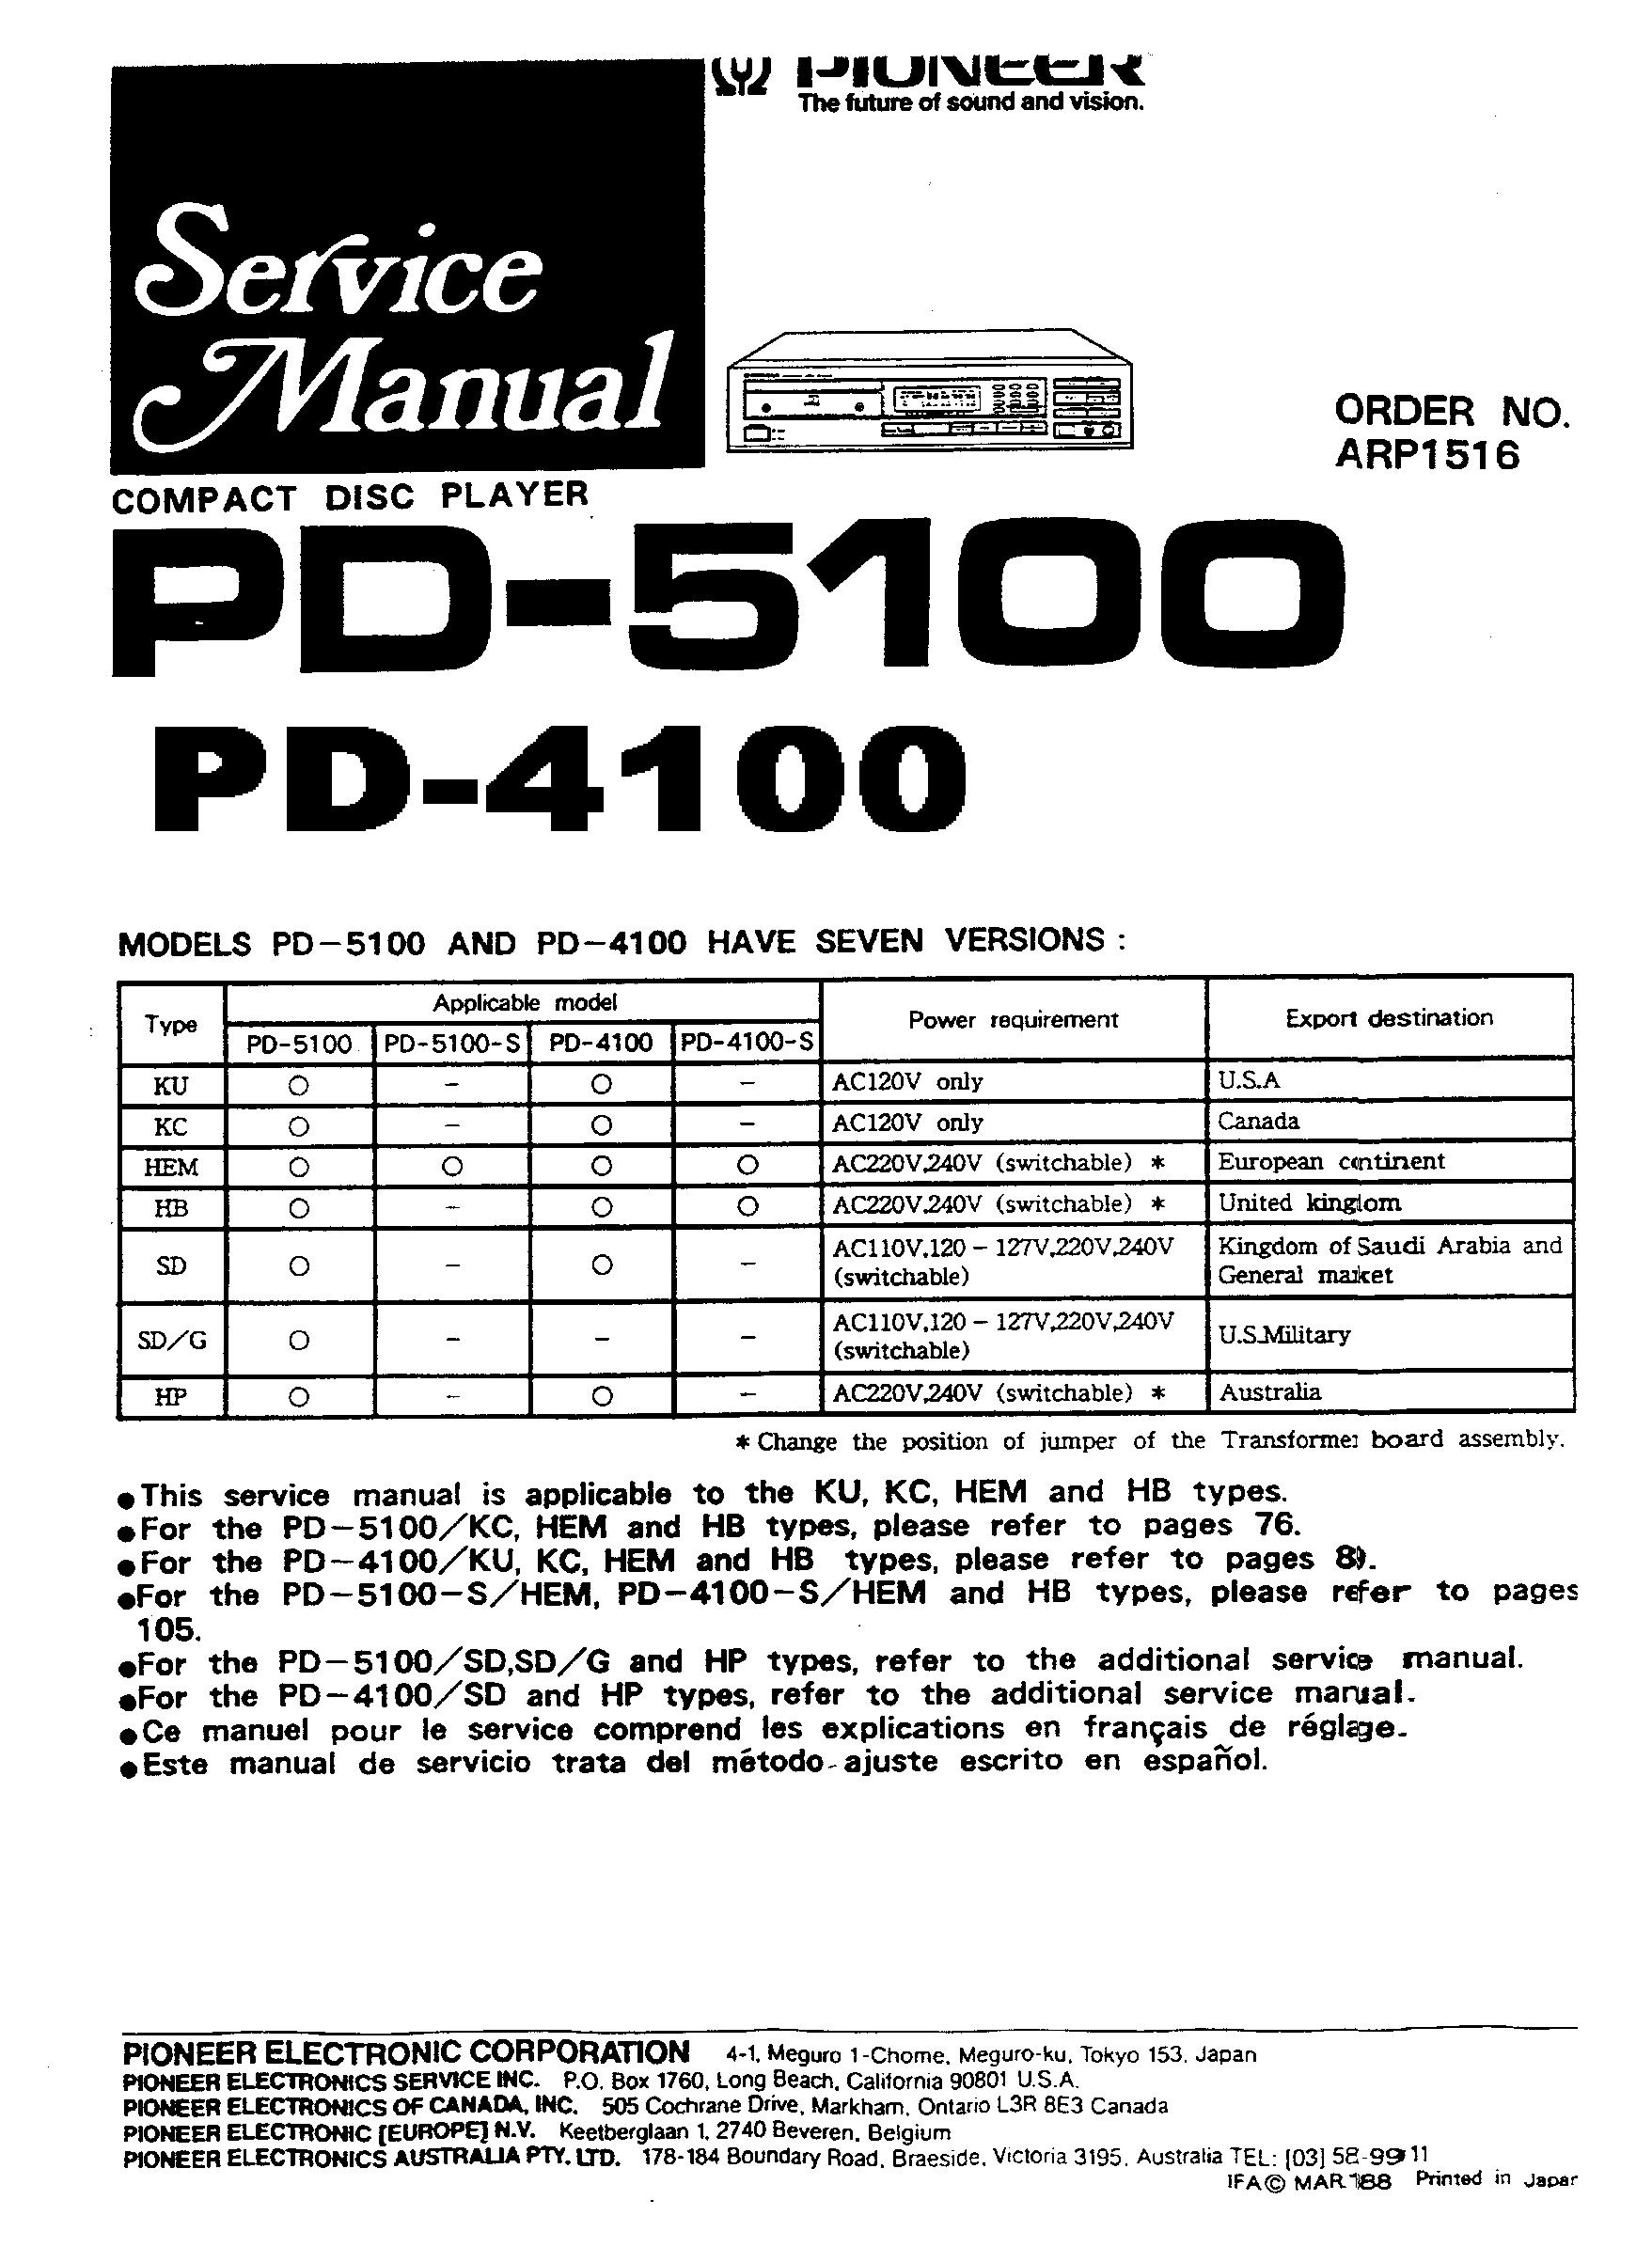 Pioneer PD-5100, PD-4100 Service manual